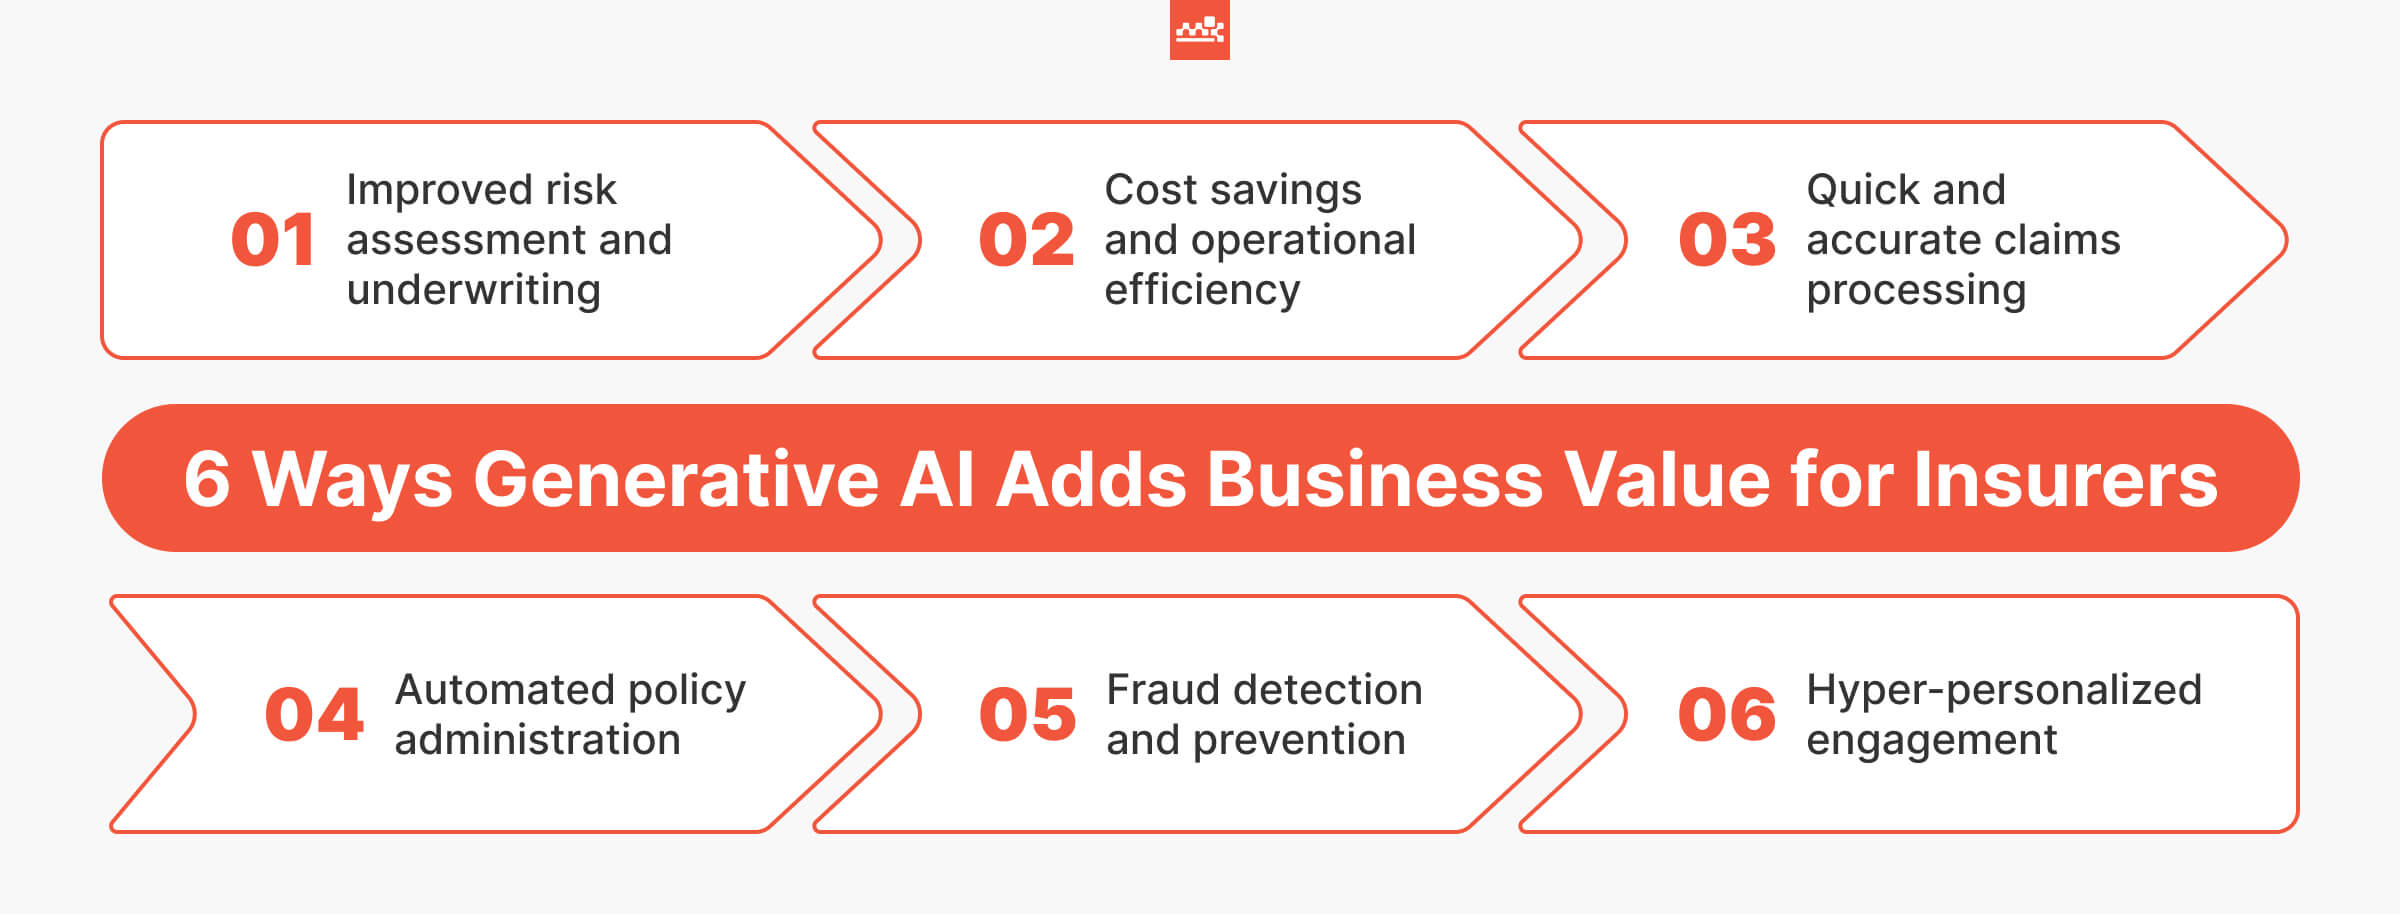 6 Ways Generative AI Adds Business Value for Insurers